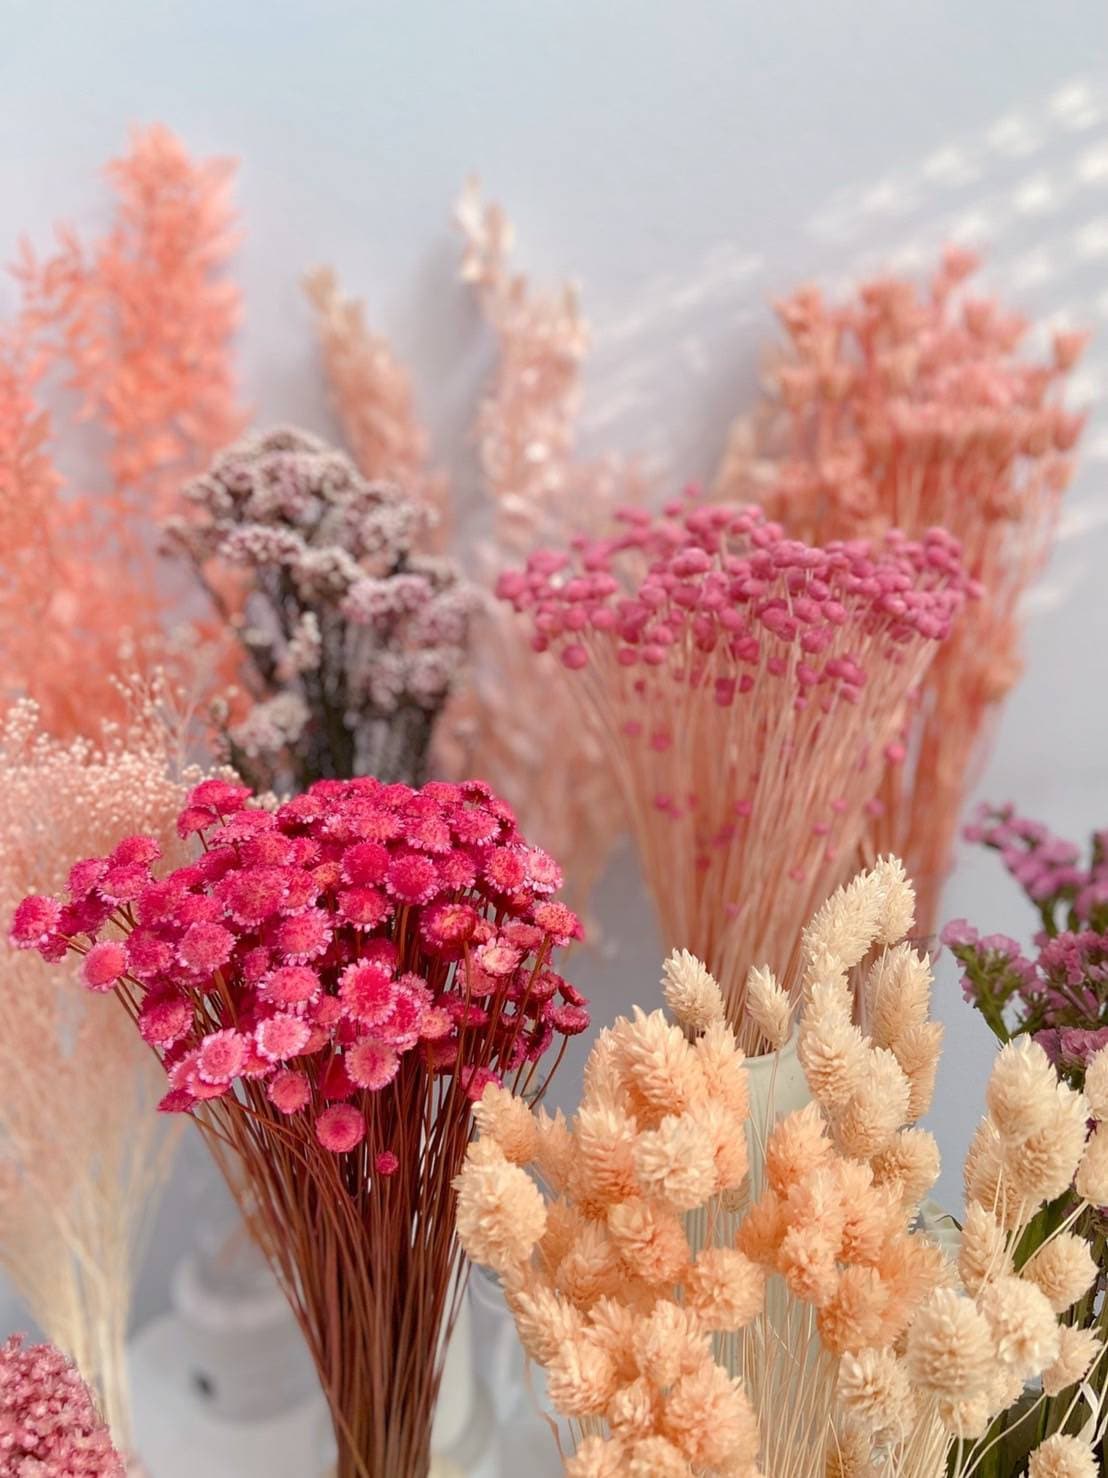 punvane Dried Flowers, Pink Dried Flowers Bouquet, 40 Natural Dried  Flowers, Aesthetic Dry Flowers for Decoration.(Pink)